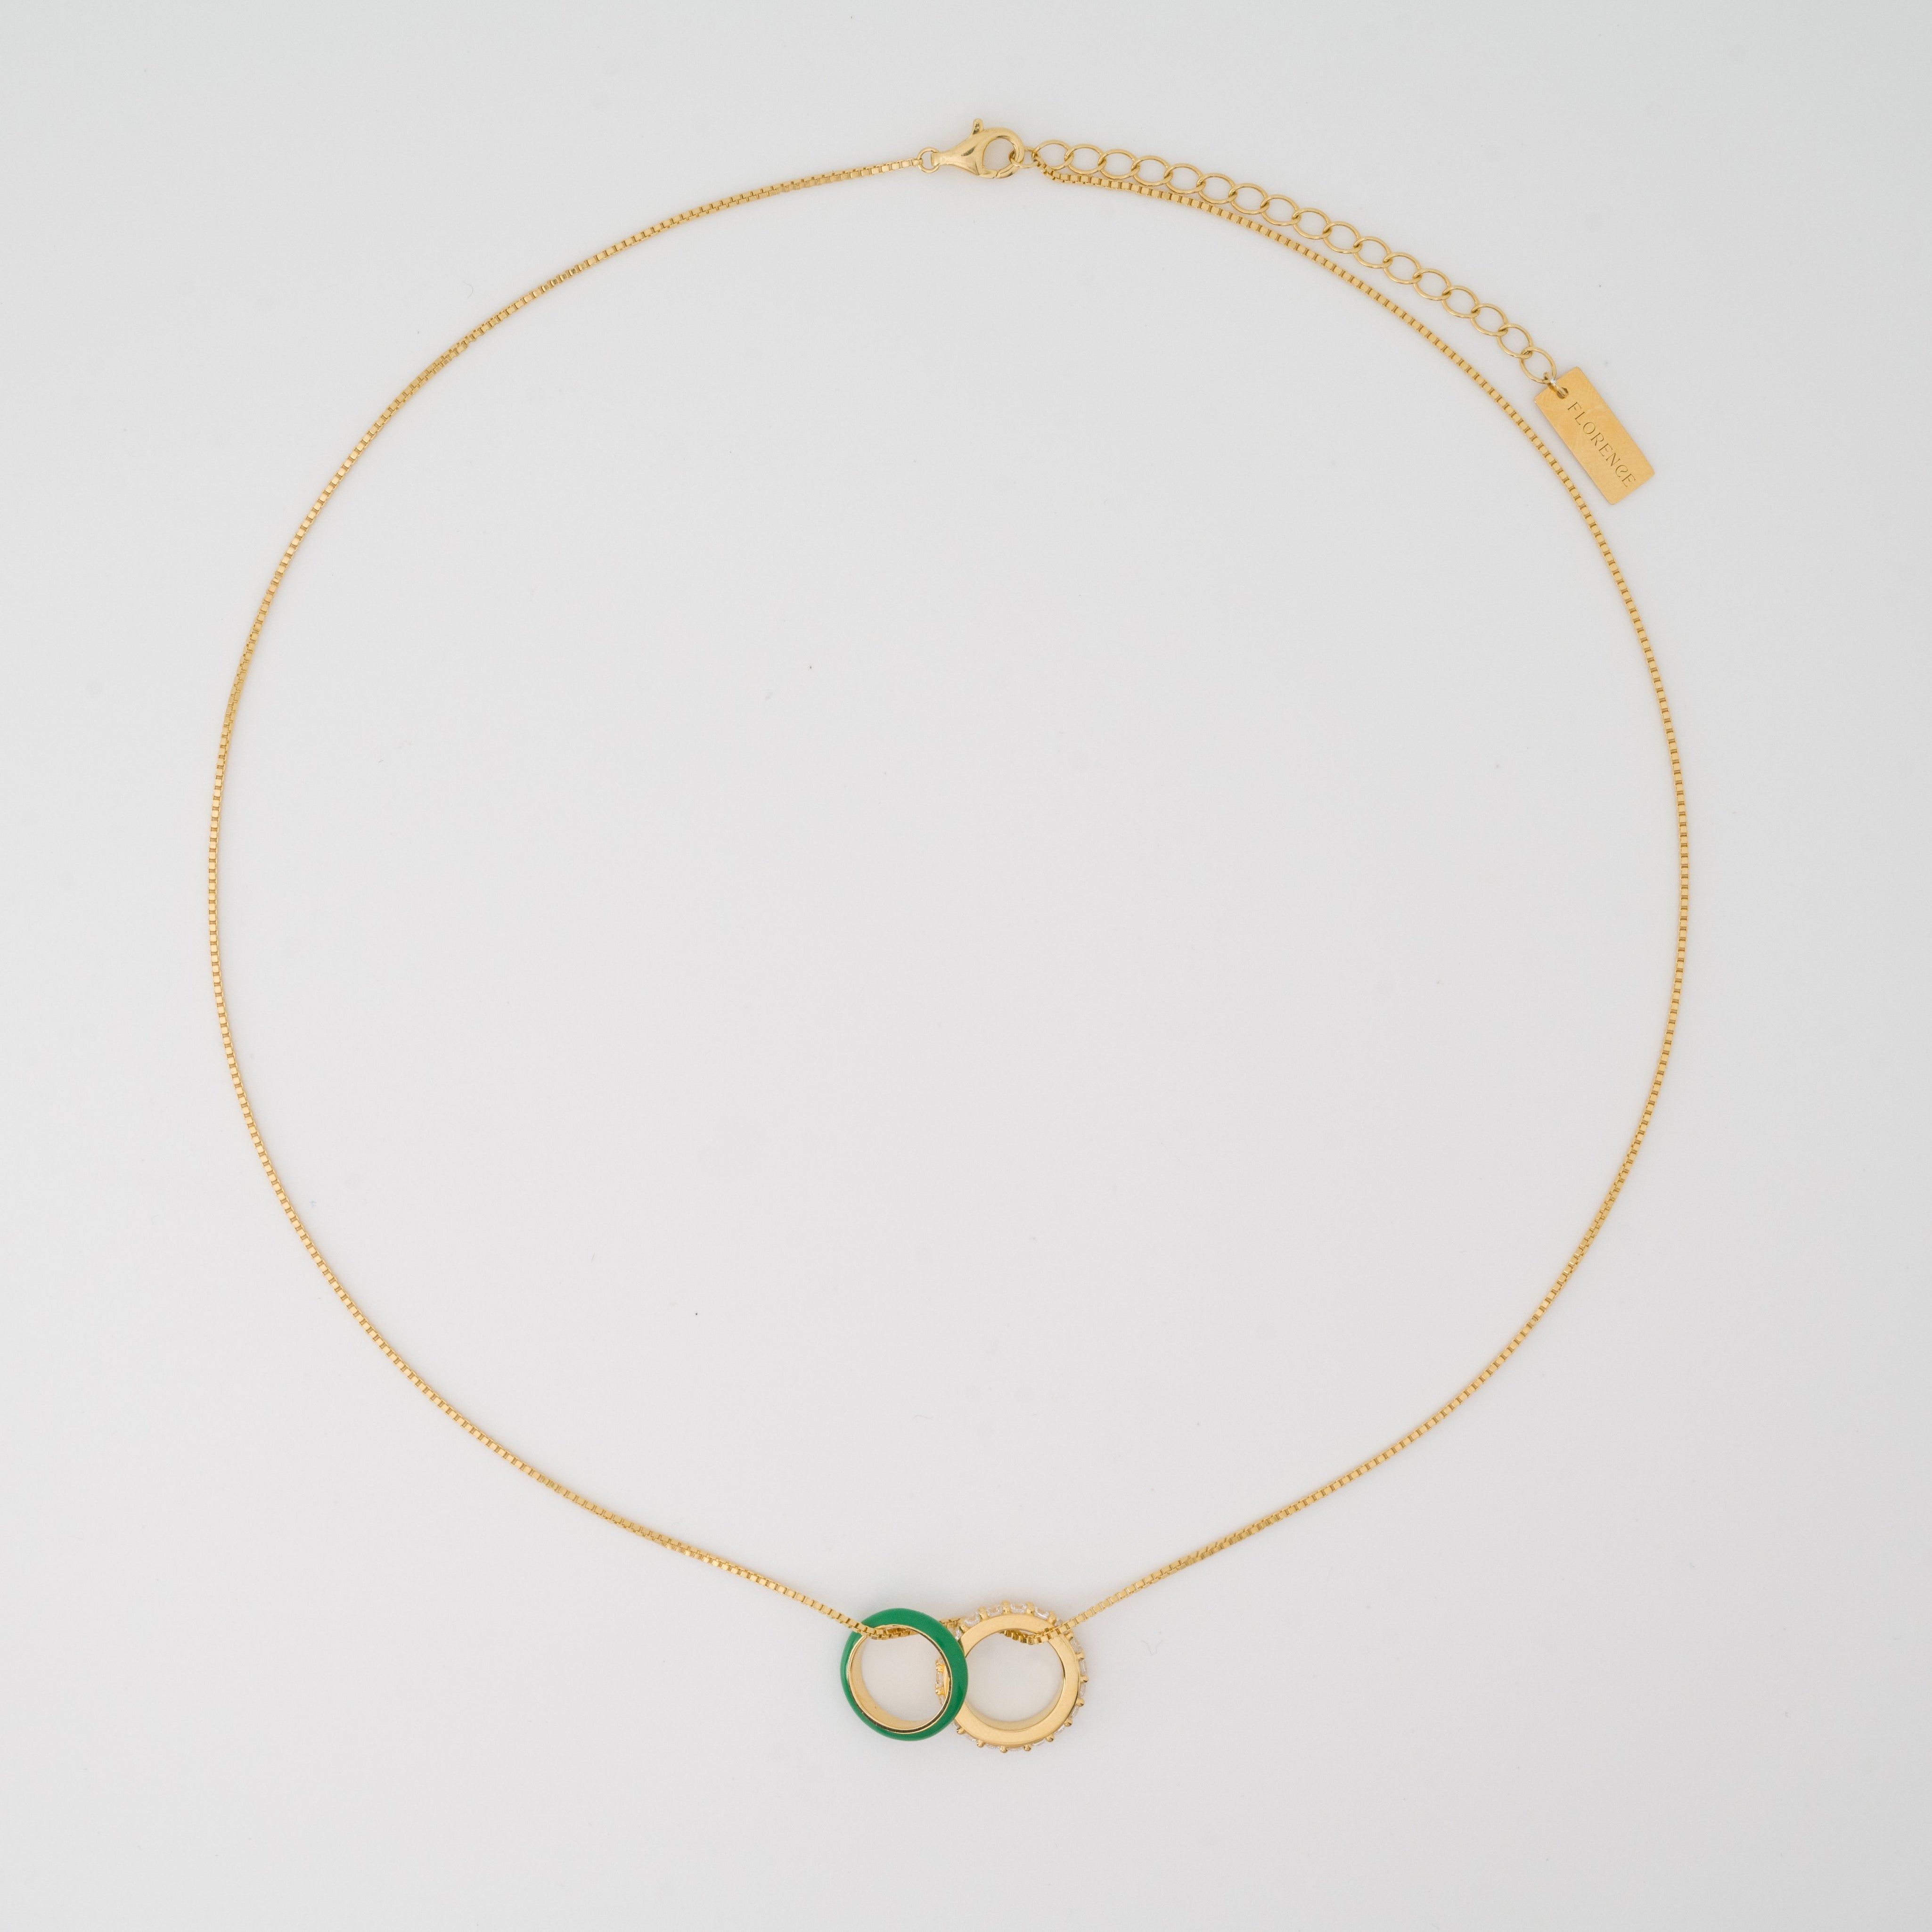 Chica Stones and Shamrock Green Enamel Hoops Gold Necklace